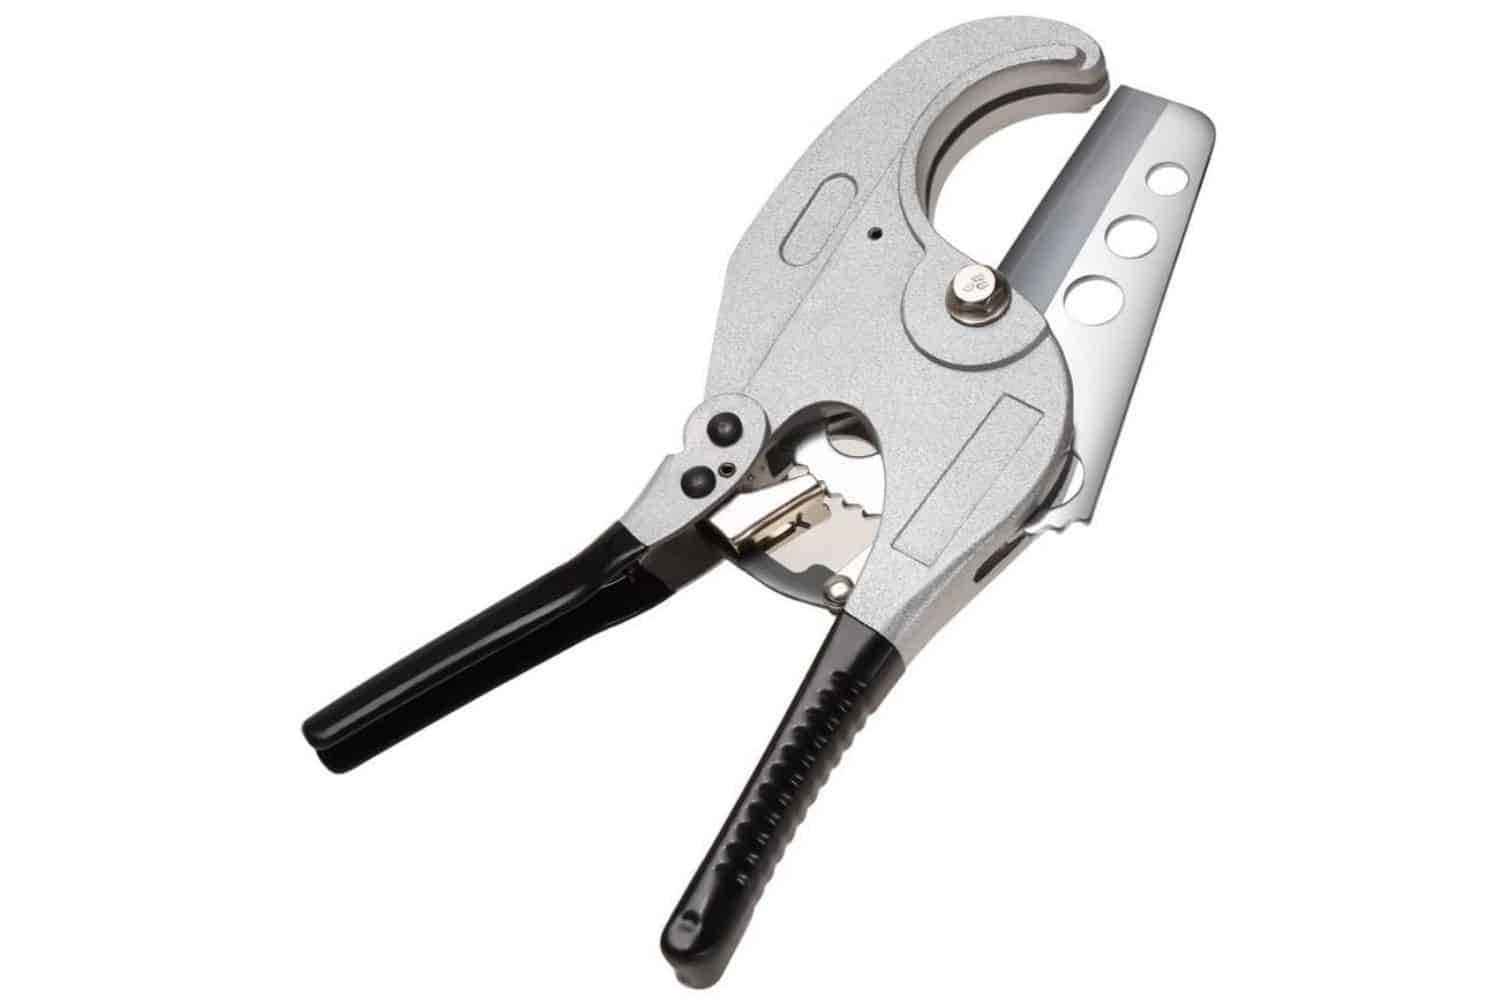 Besilence Ratcheting PVC Cutter Tool Review